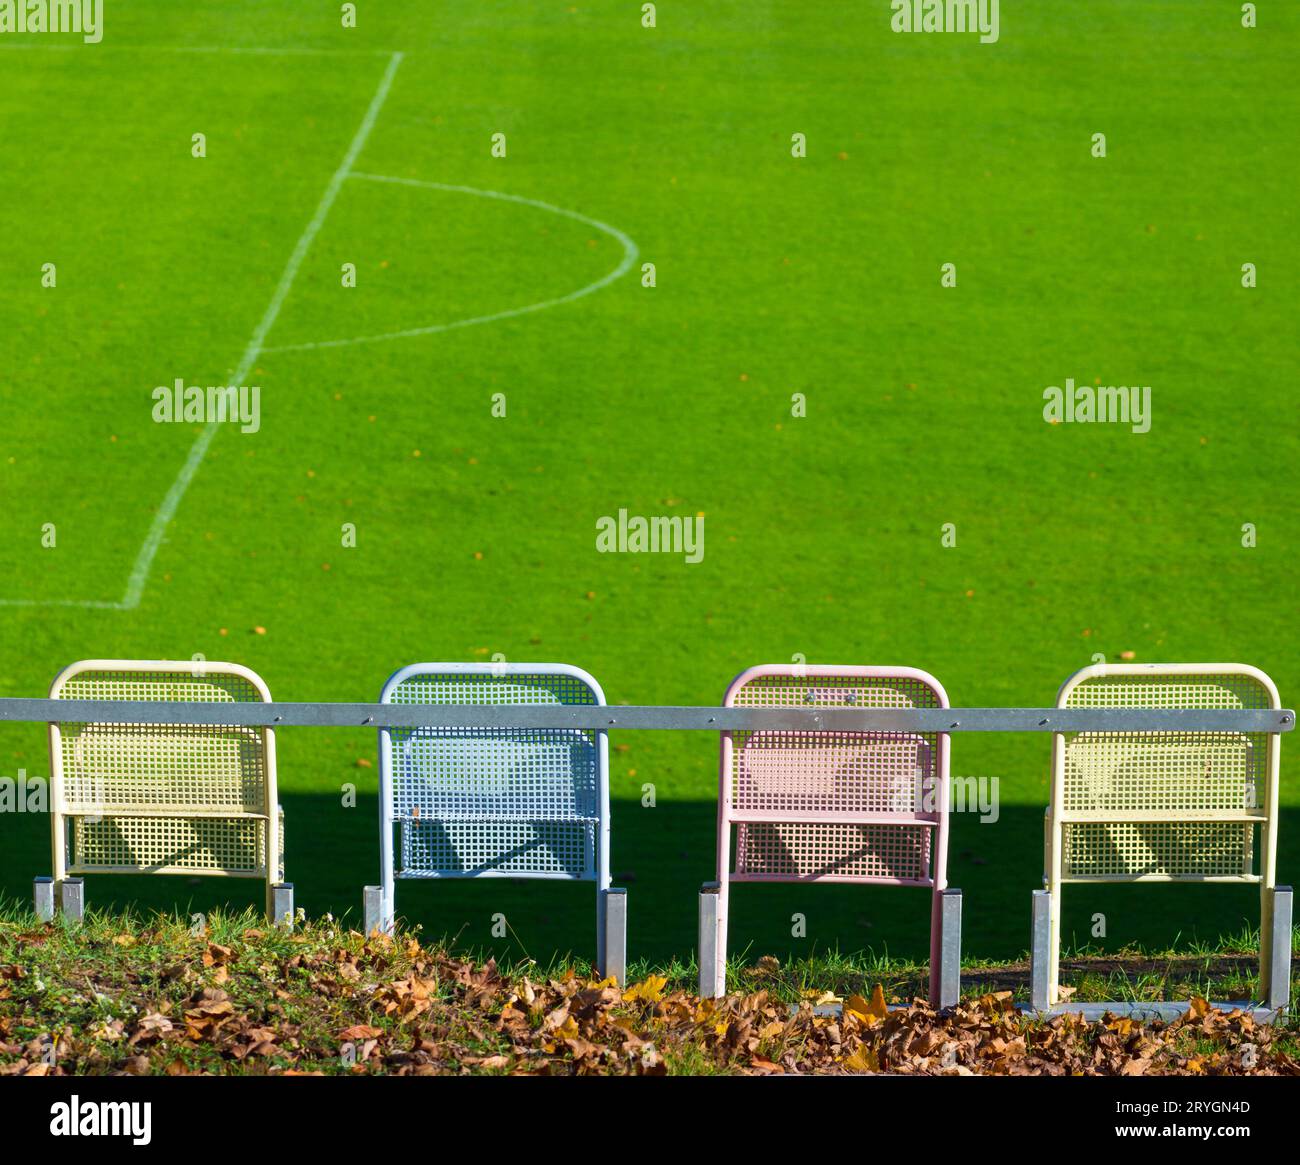 Bench on the Sideline of a Football Field Stock Photo